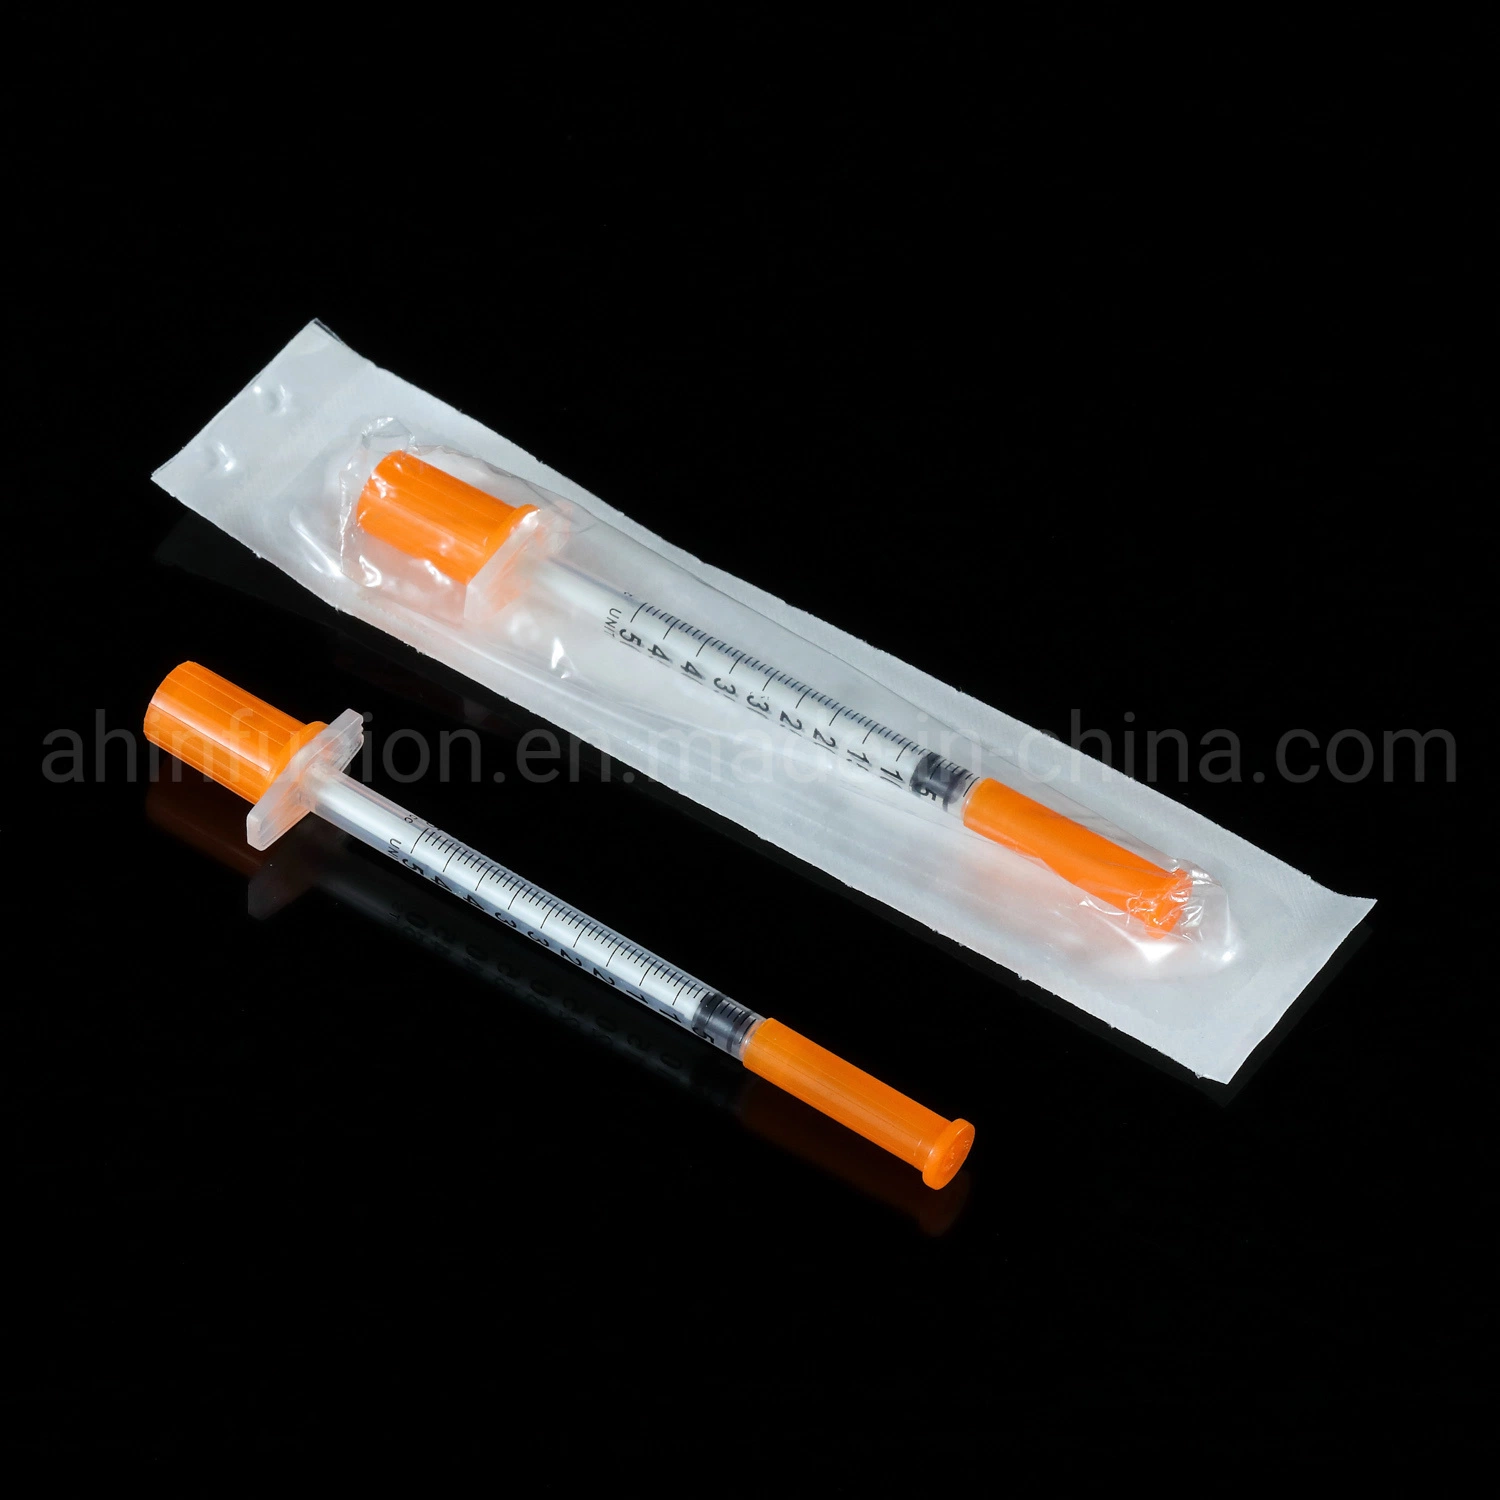 in Good Package New Type Medical Disposable Insulin Syringe Needle